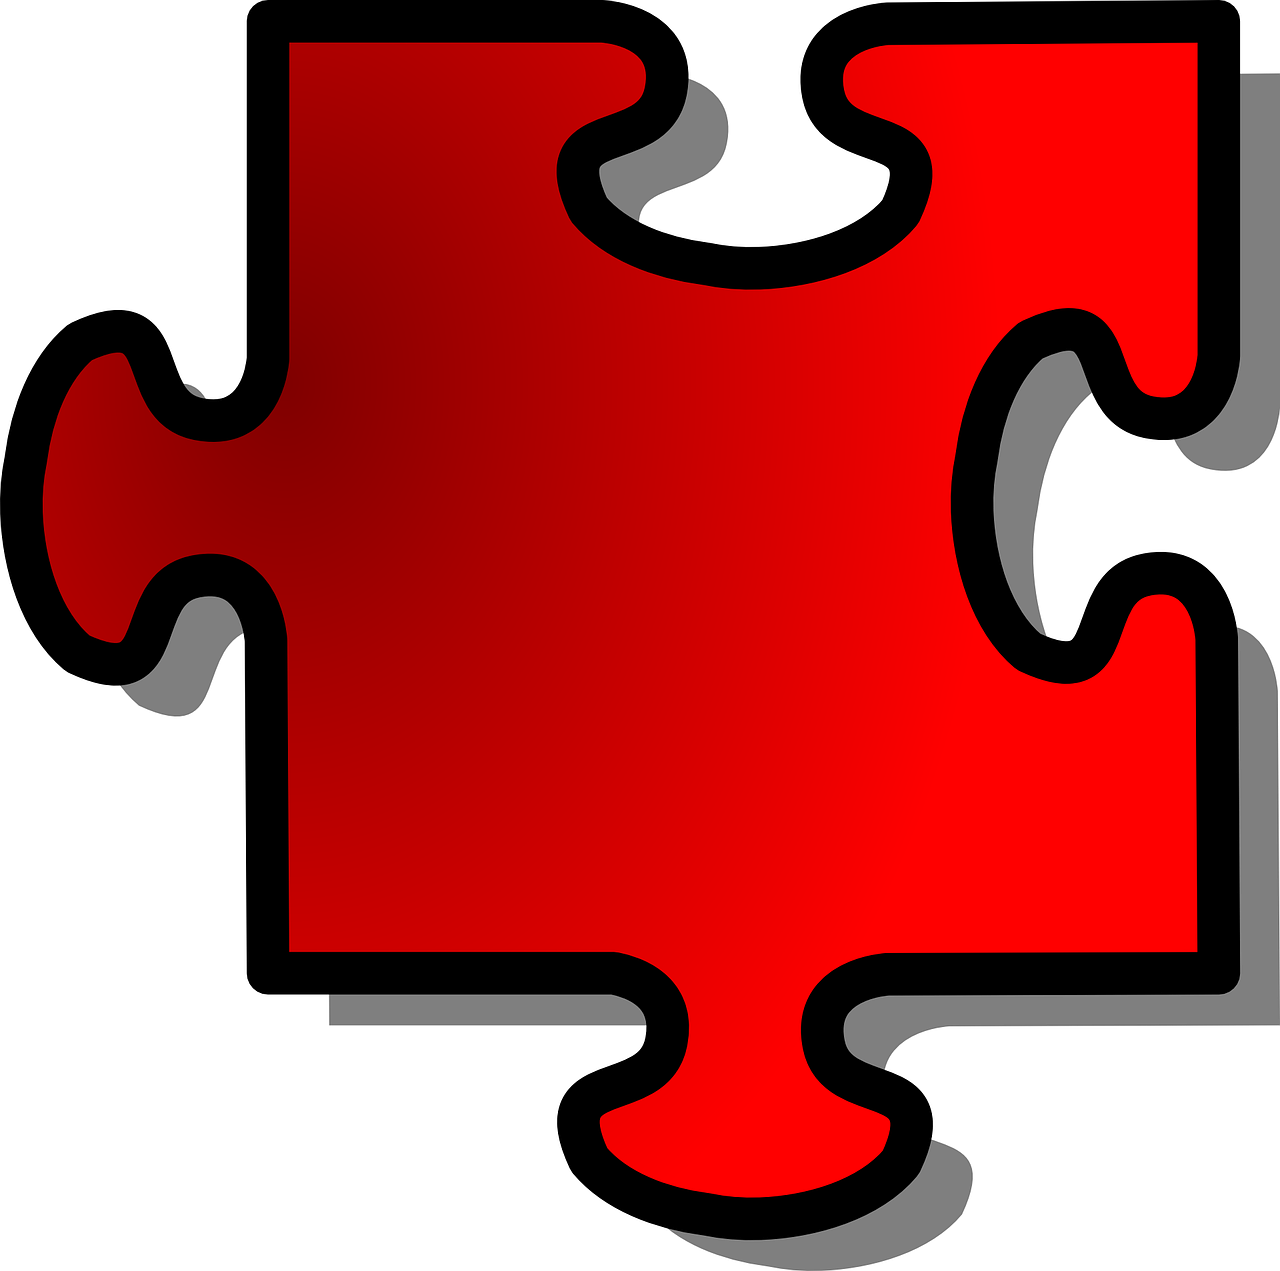 jigsaw,puzzle,piece,game,shape,red,join,connect,part,challenge,solution,free vector graphics,free pictures, free photos, free images, royalty free, free illustrations, public domain